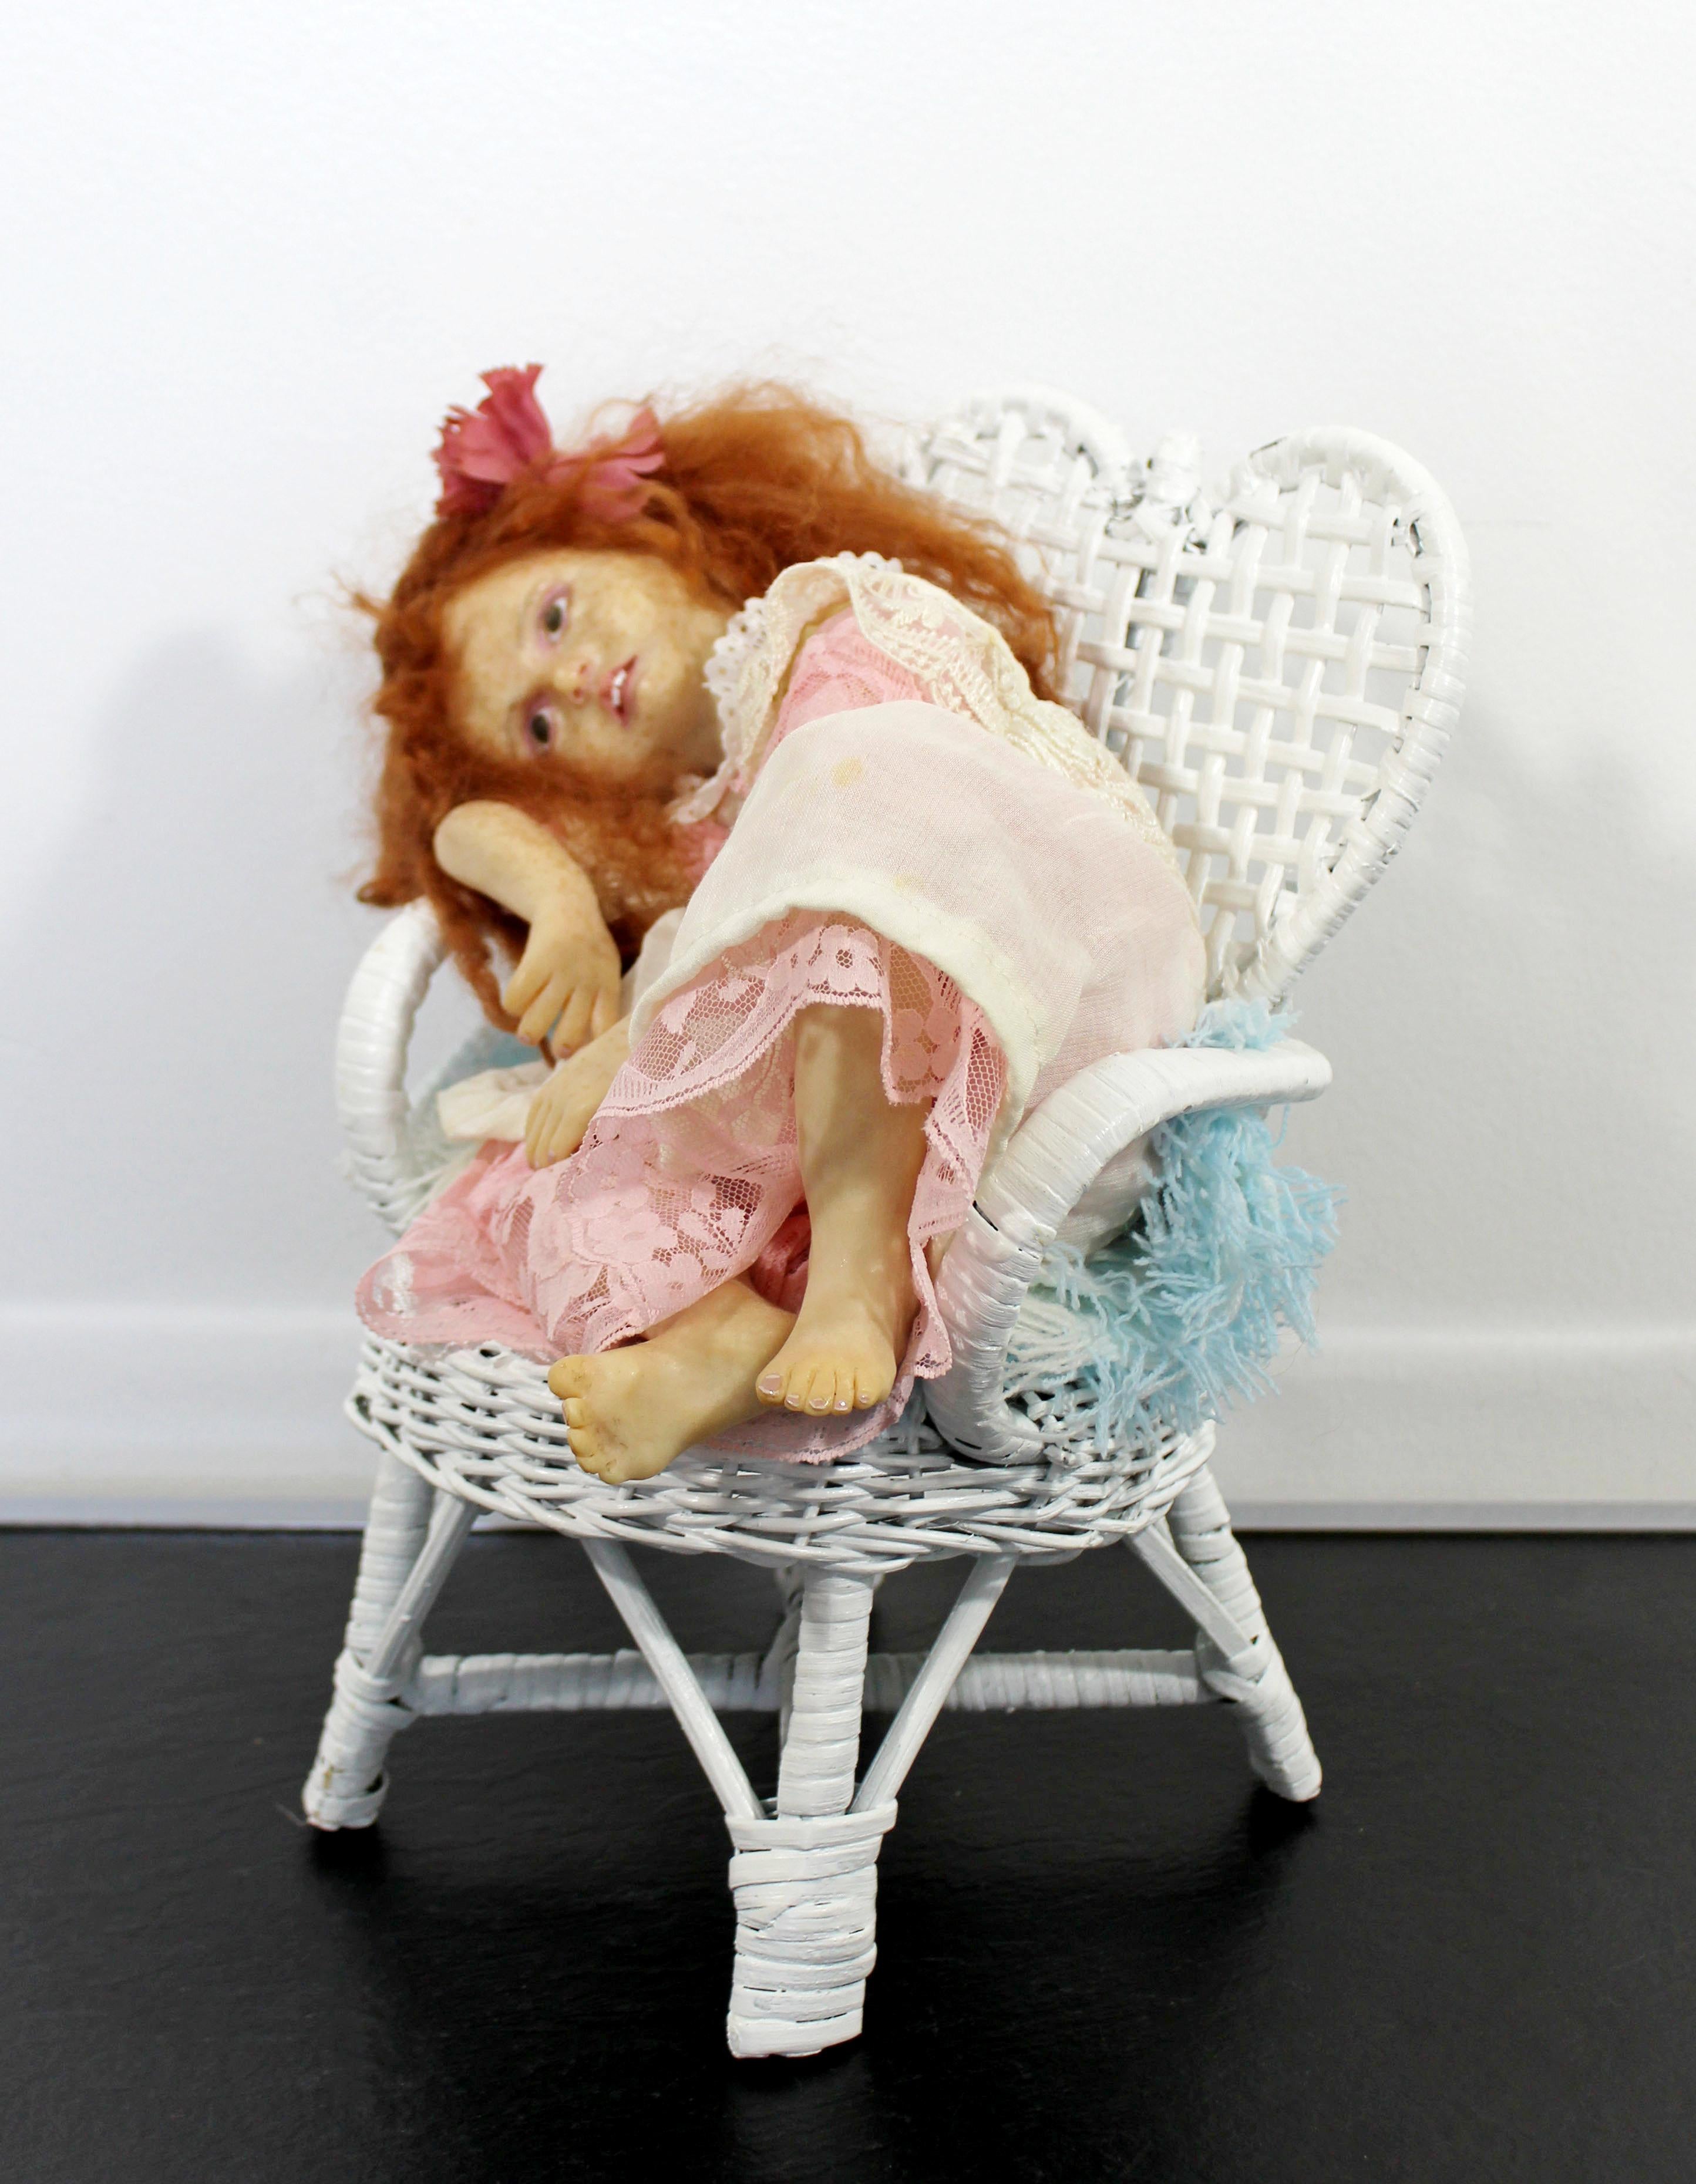 American Contemporary Modern Ceramic Polymer Sculpted Girl Doll Table Sculpture Liz Shaw